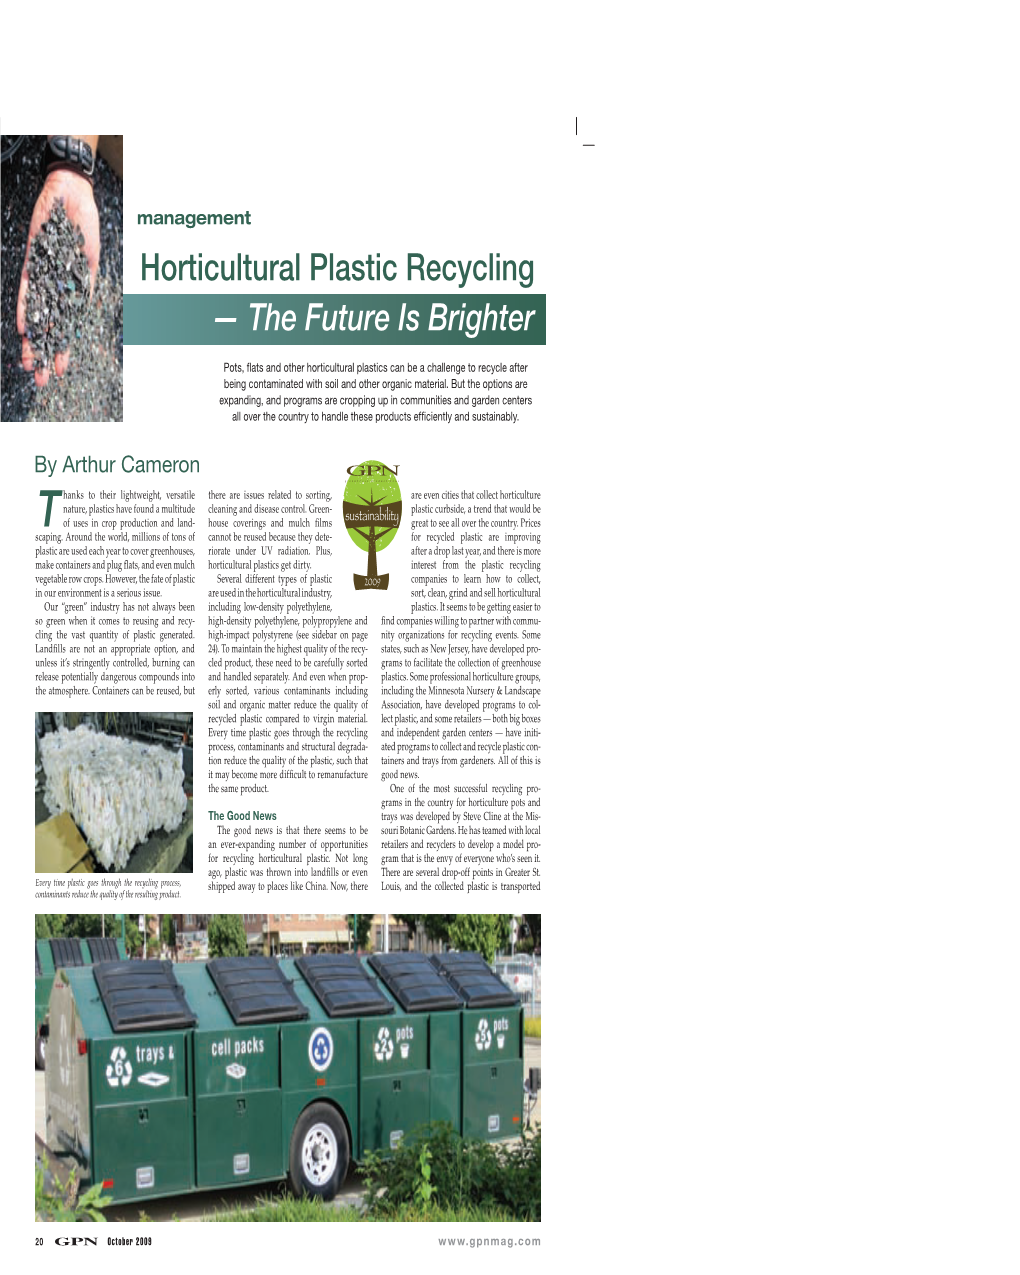 Horticultural Plastic Recycling — the Future Is Brighter